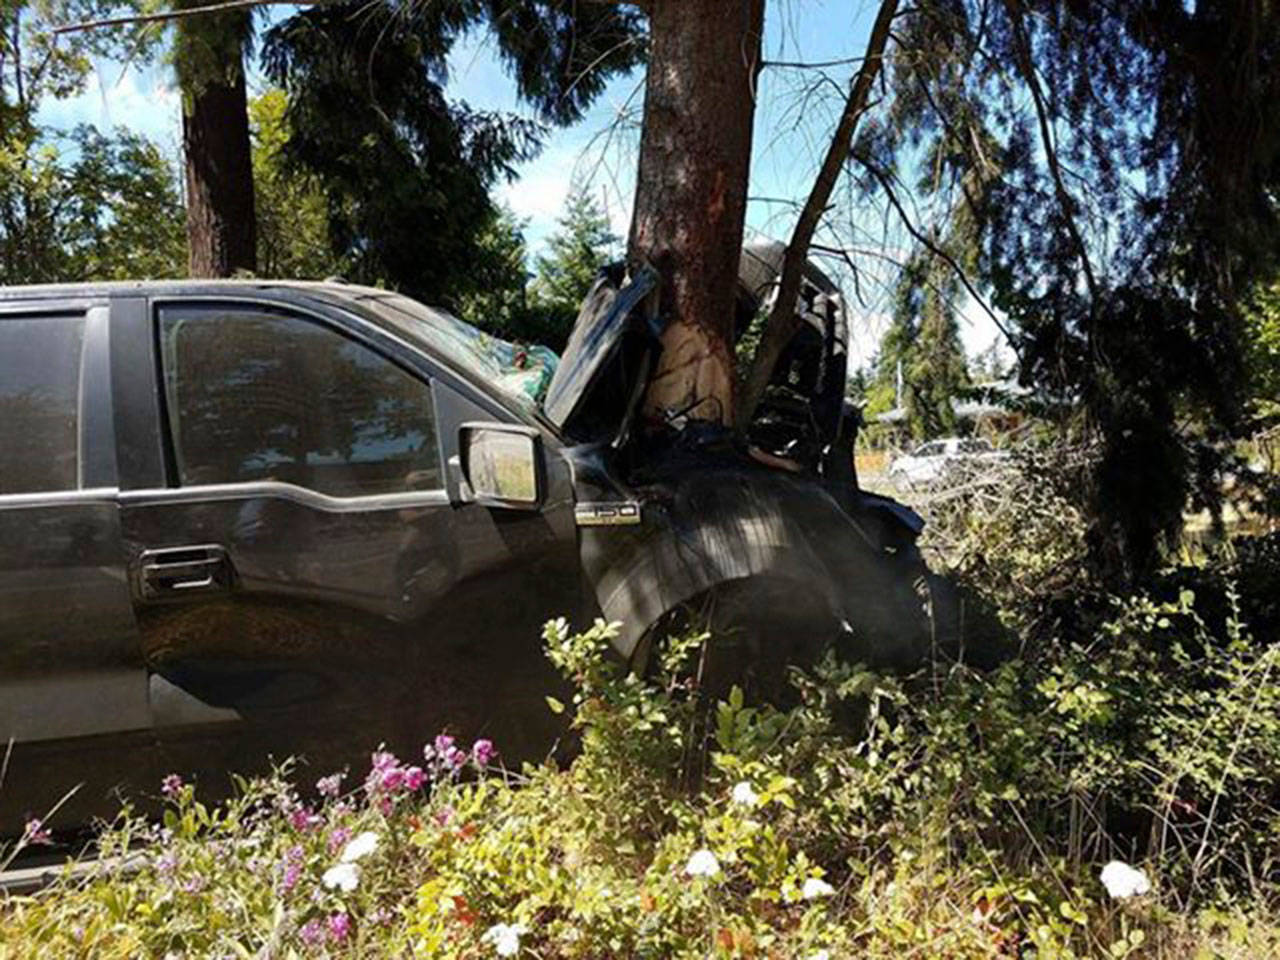 A man was sent to the hospital Saturday after this truck swerved off Old Olympic Highway and hit a tree. (Ennis Caynor)